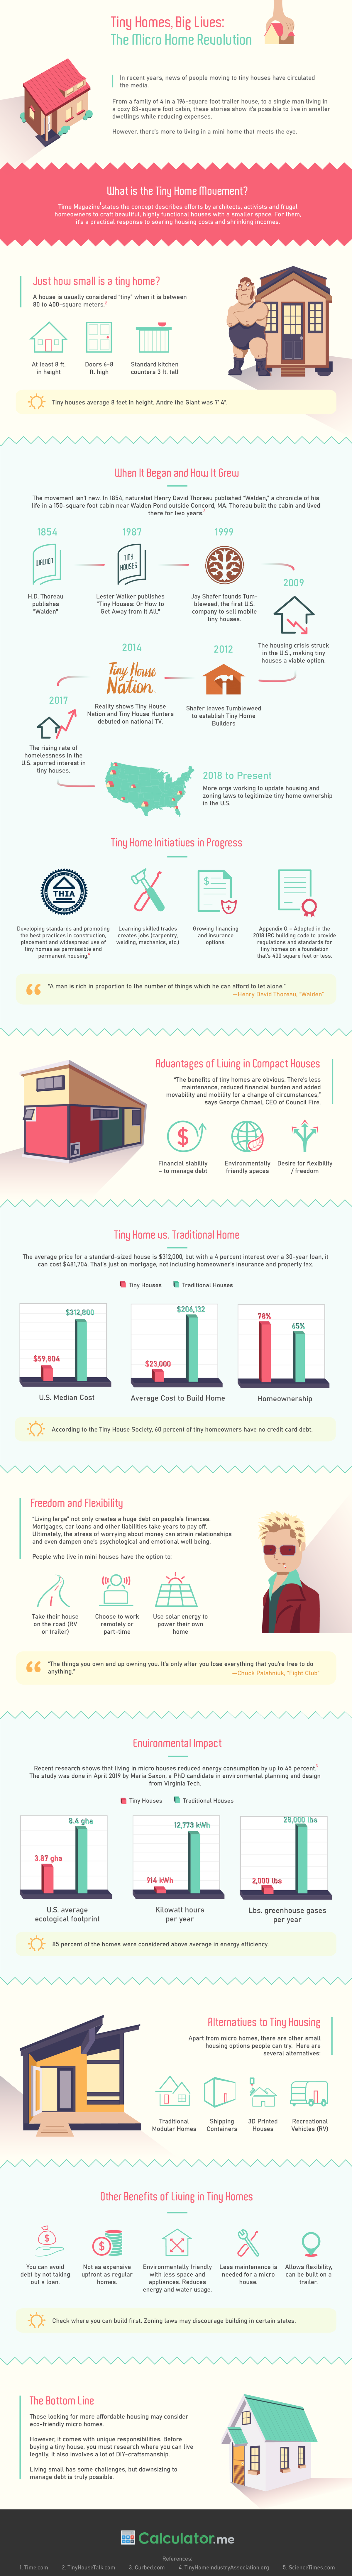 A Guide to Understanding the Tiny Homes Movement by Calculator.me